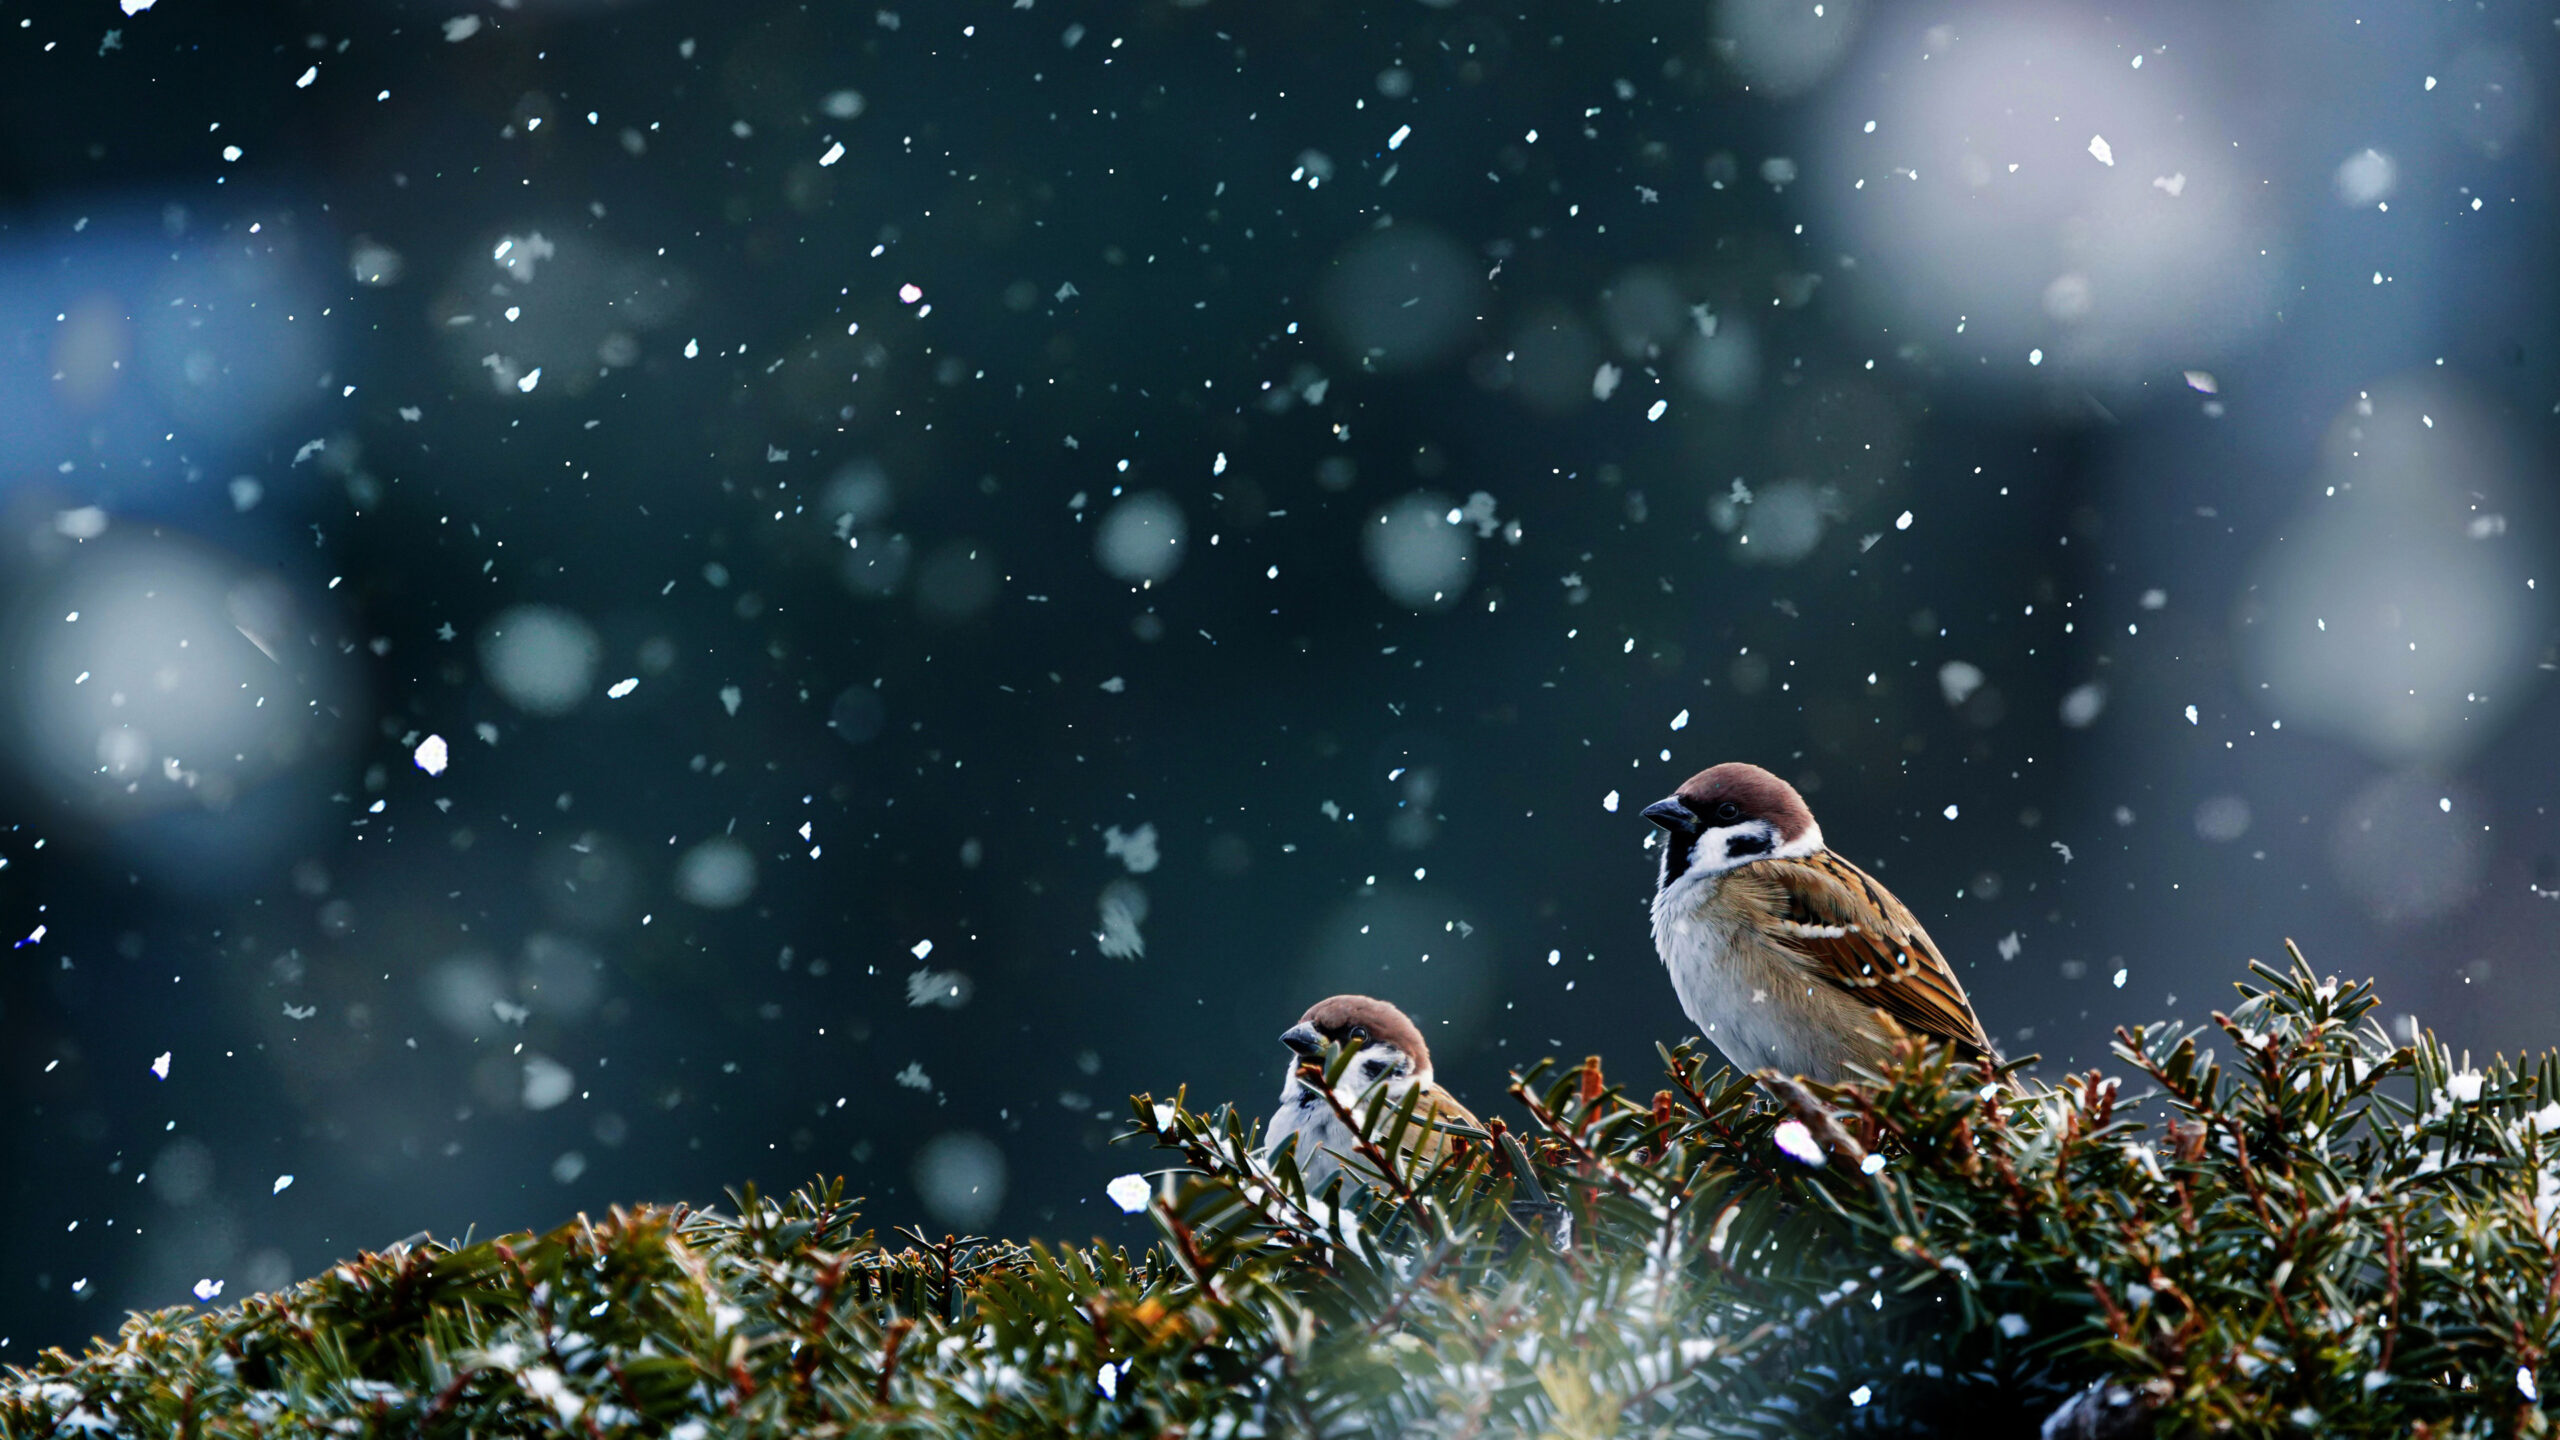 Two Sparrow Birds Are Standing On Frozen Tree Branches In Snowfall Wallpaper K HD Birds